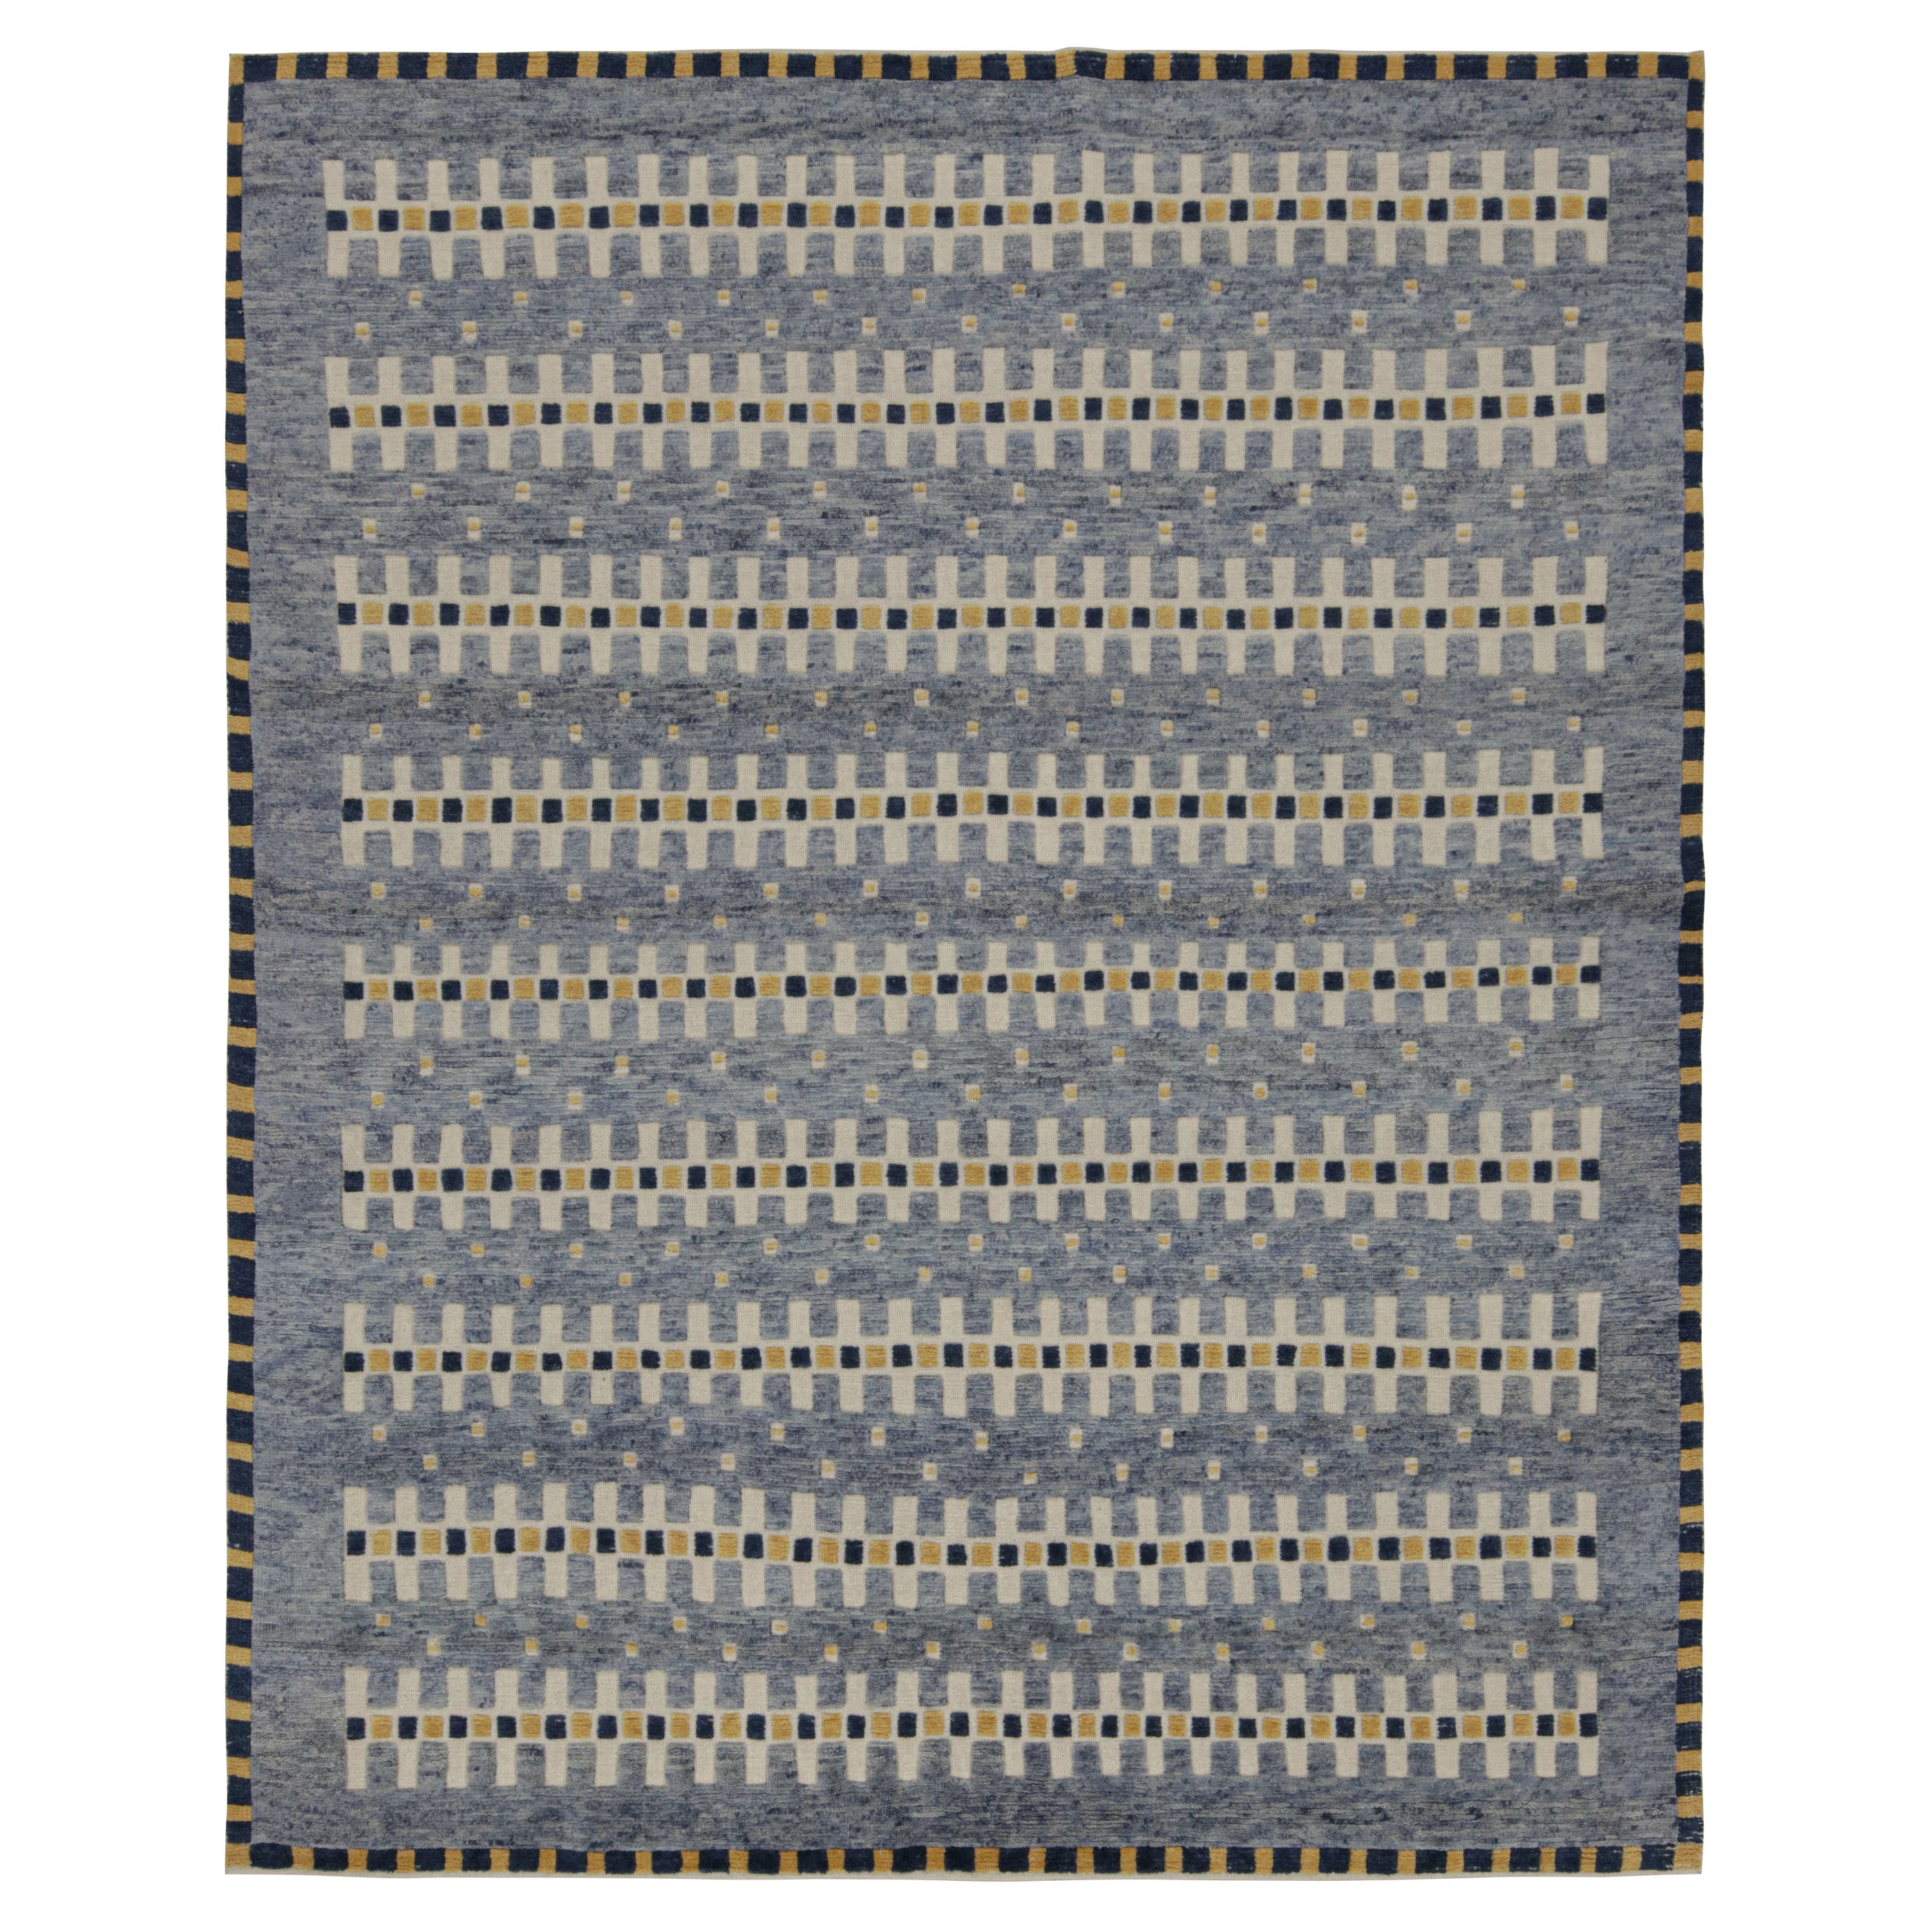 Rug & Kilim’s Scandinavian Style Rug in Blue with Geometric Patterns